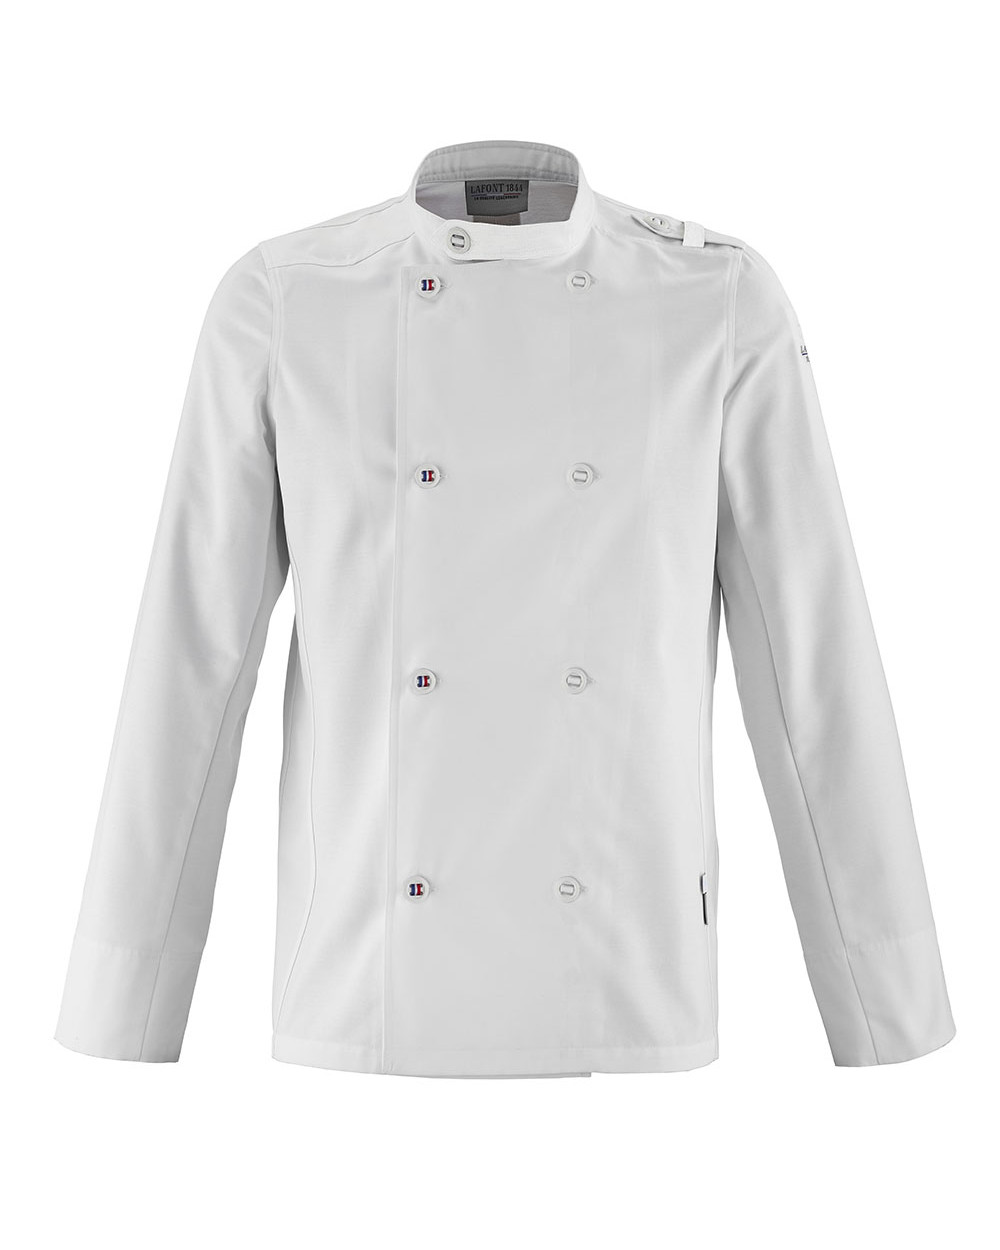 VESTE HOMME CANOPEE BLANC 40% POLYES RECYCLE 37.5 30% COTON BIO REF.2CNPH